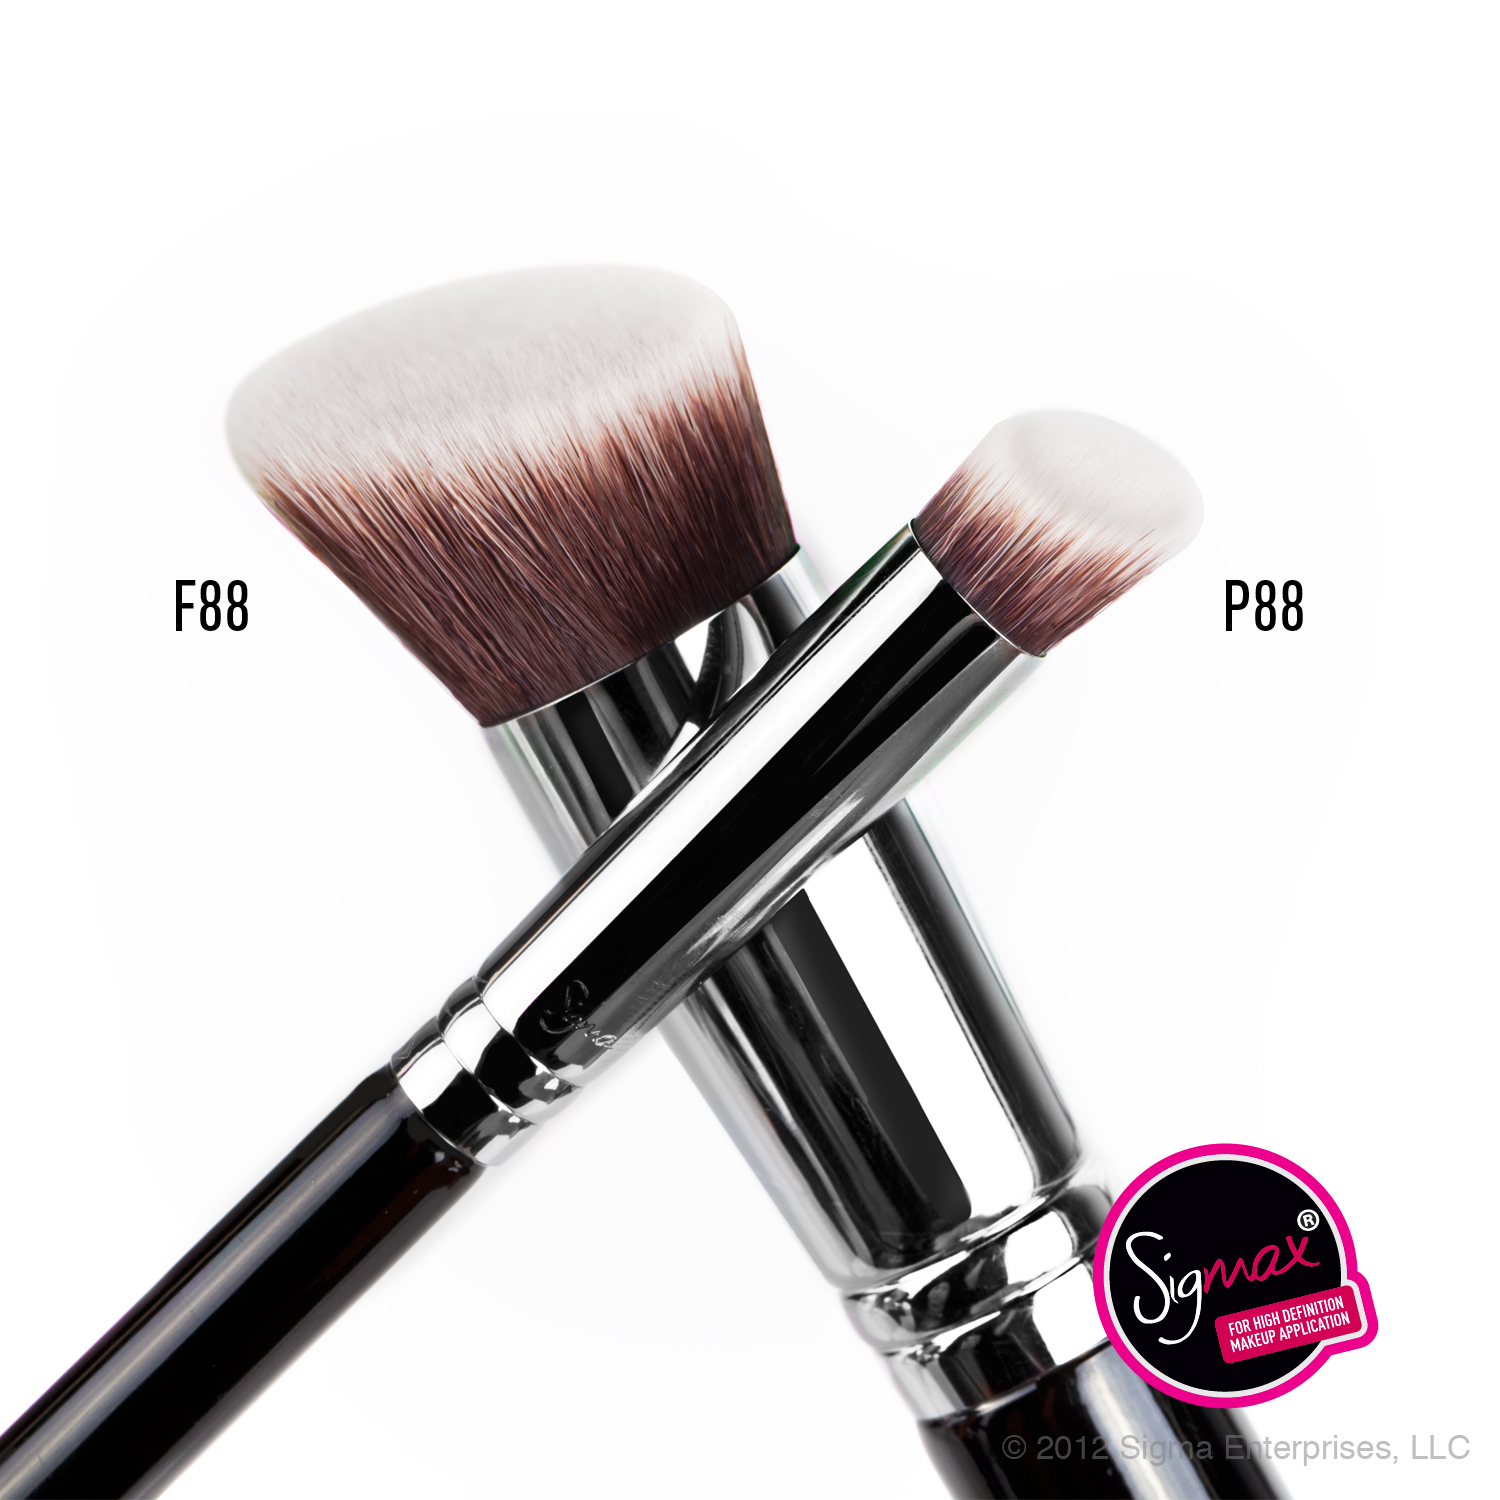 Sigma Beauty F88 and P88 brushes